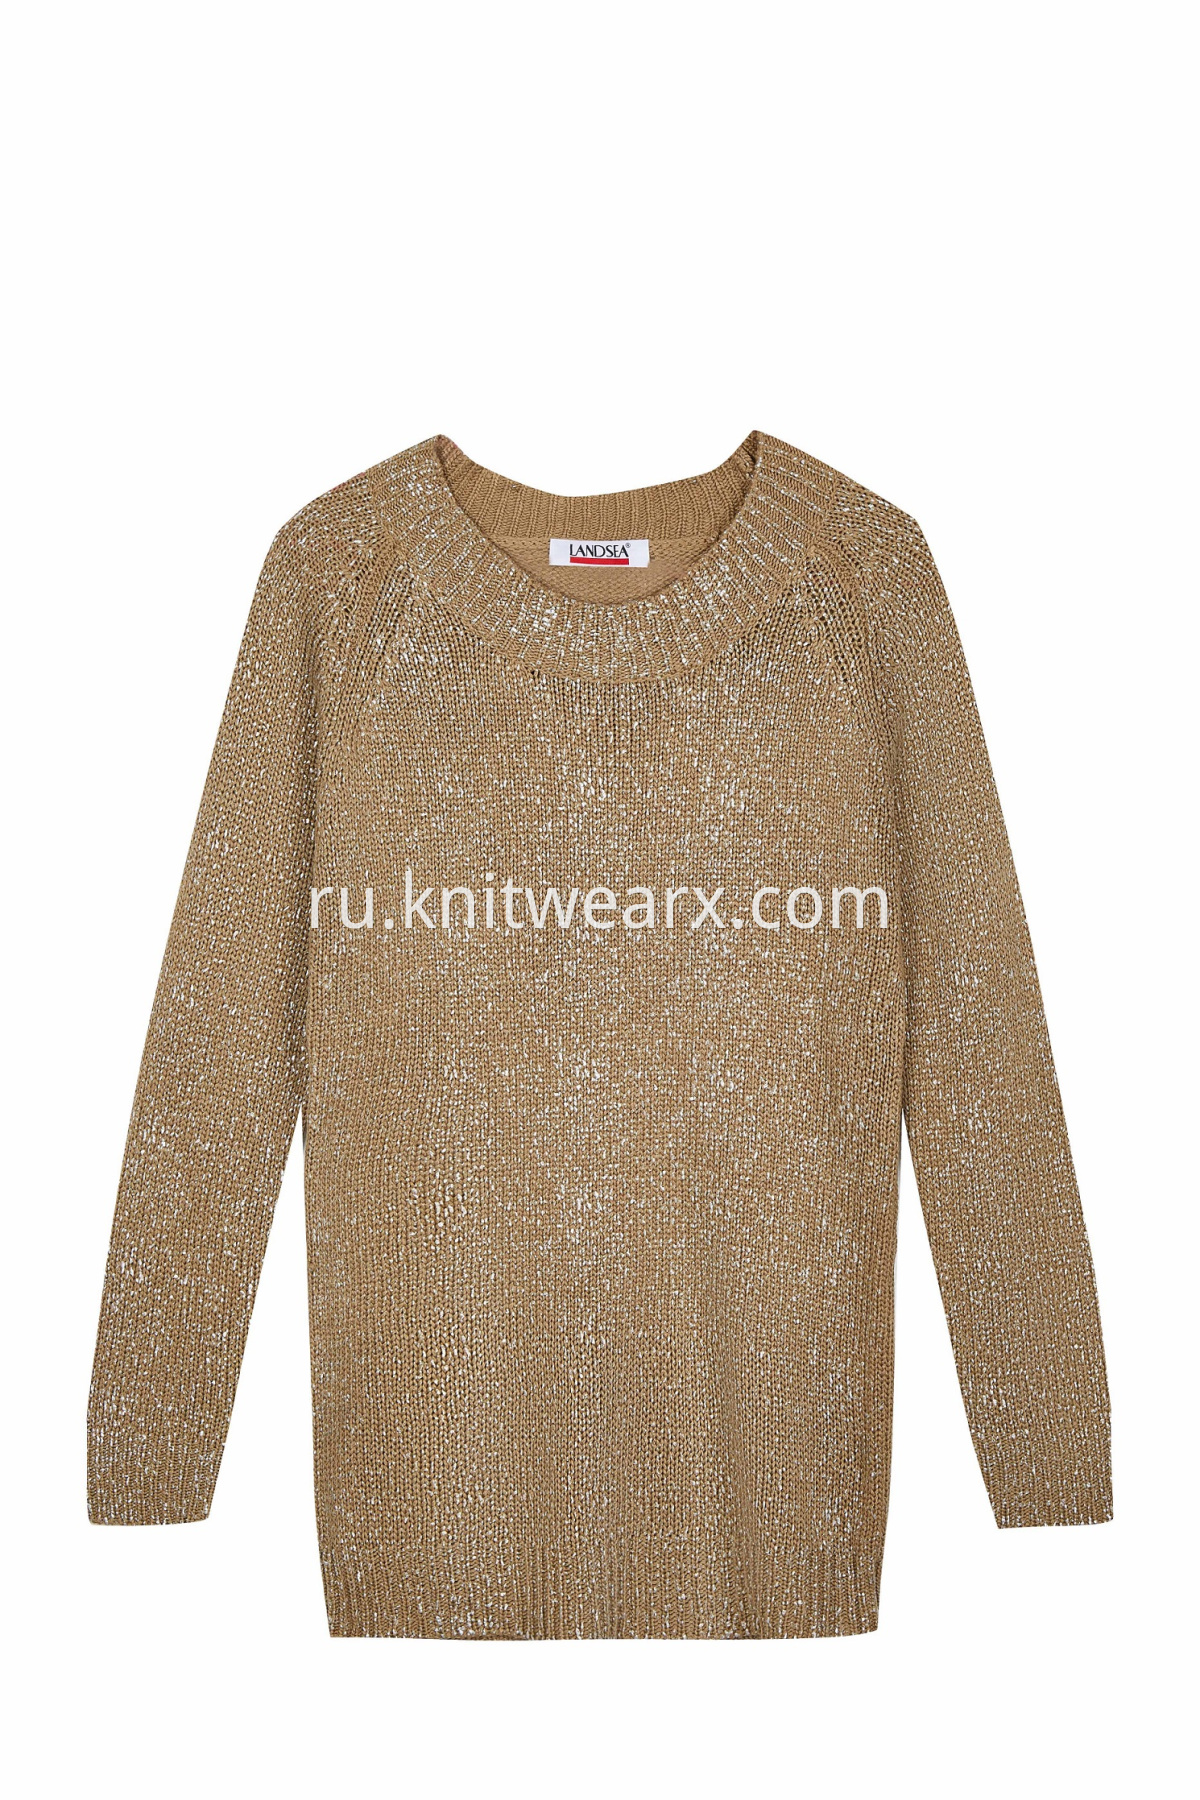 Women‘s Gold Stamping Crew neck Knitted Pullover